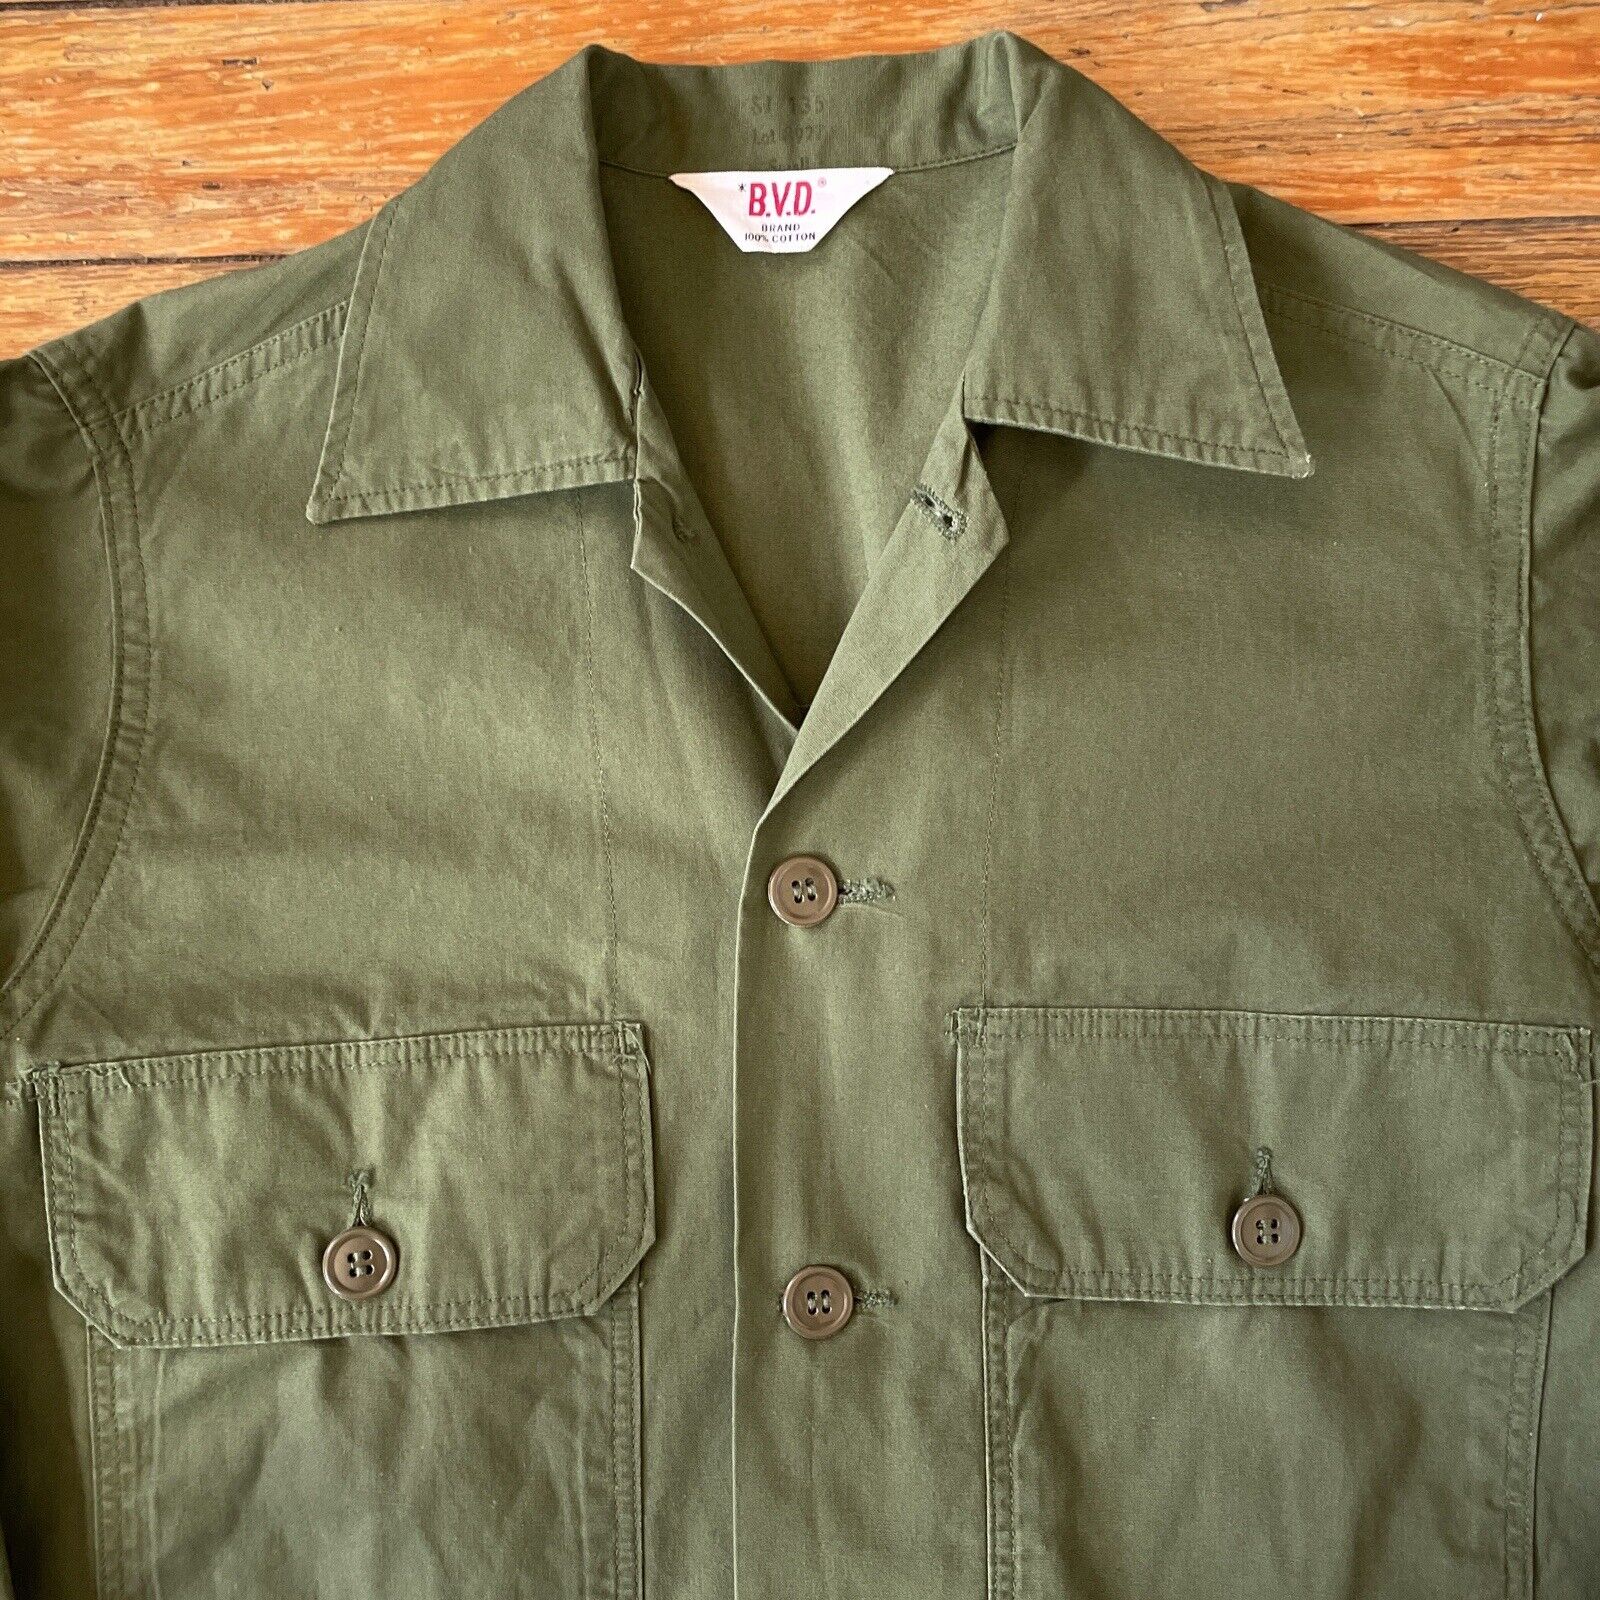 Vintage Vietnam BVD Brand Military Fatigues Shirt Top OG Green Army Small - Mint